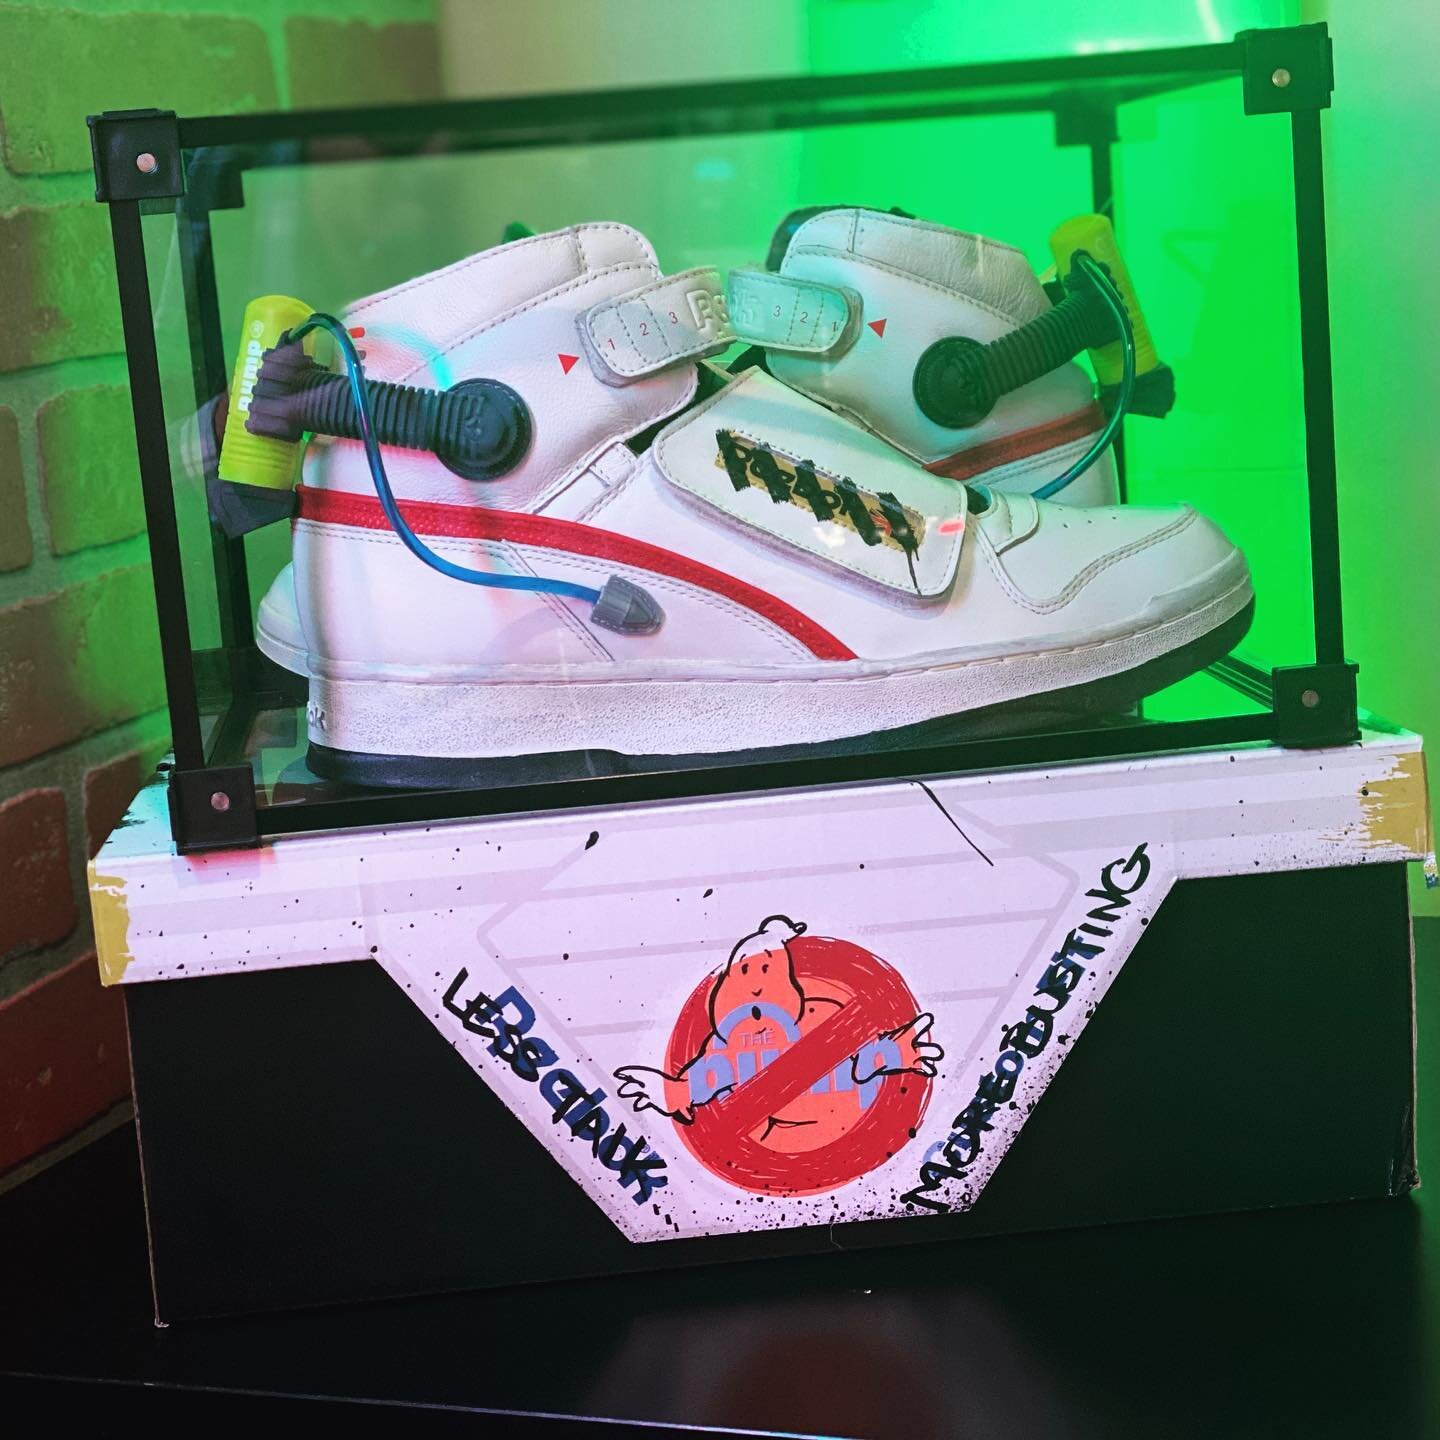 Snagged these #ghostsmashers on launch and lovin how far @reebok took the #ghostbusters license. Keep watching #reebok as they are #popmarketing best in class right now.